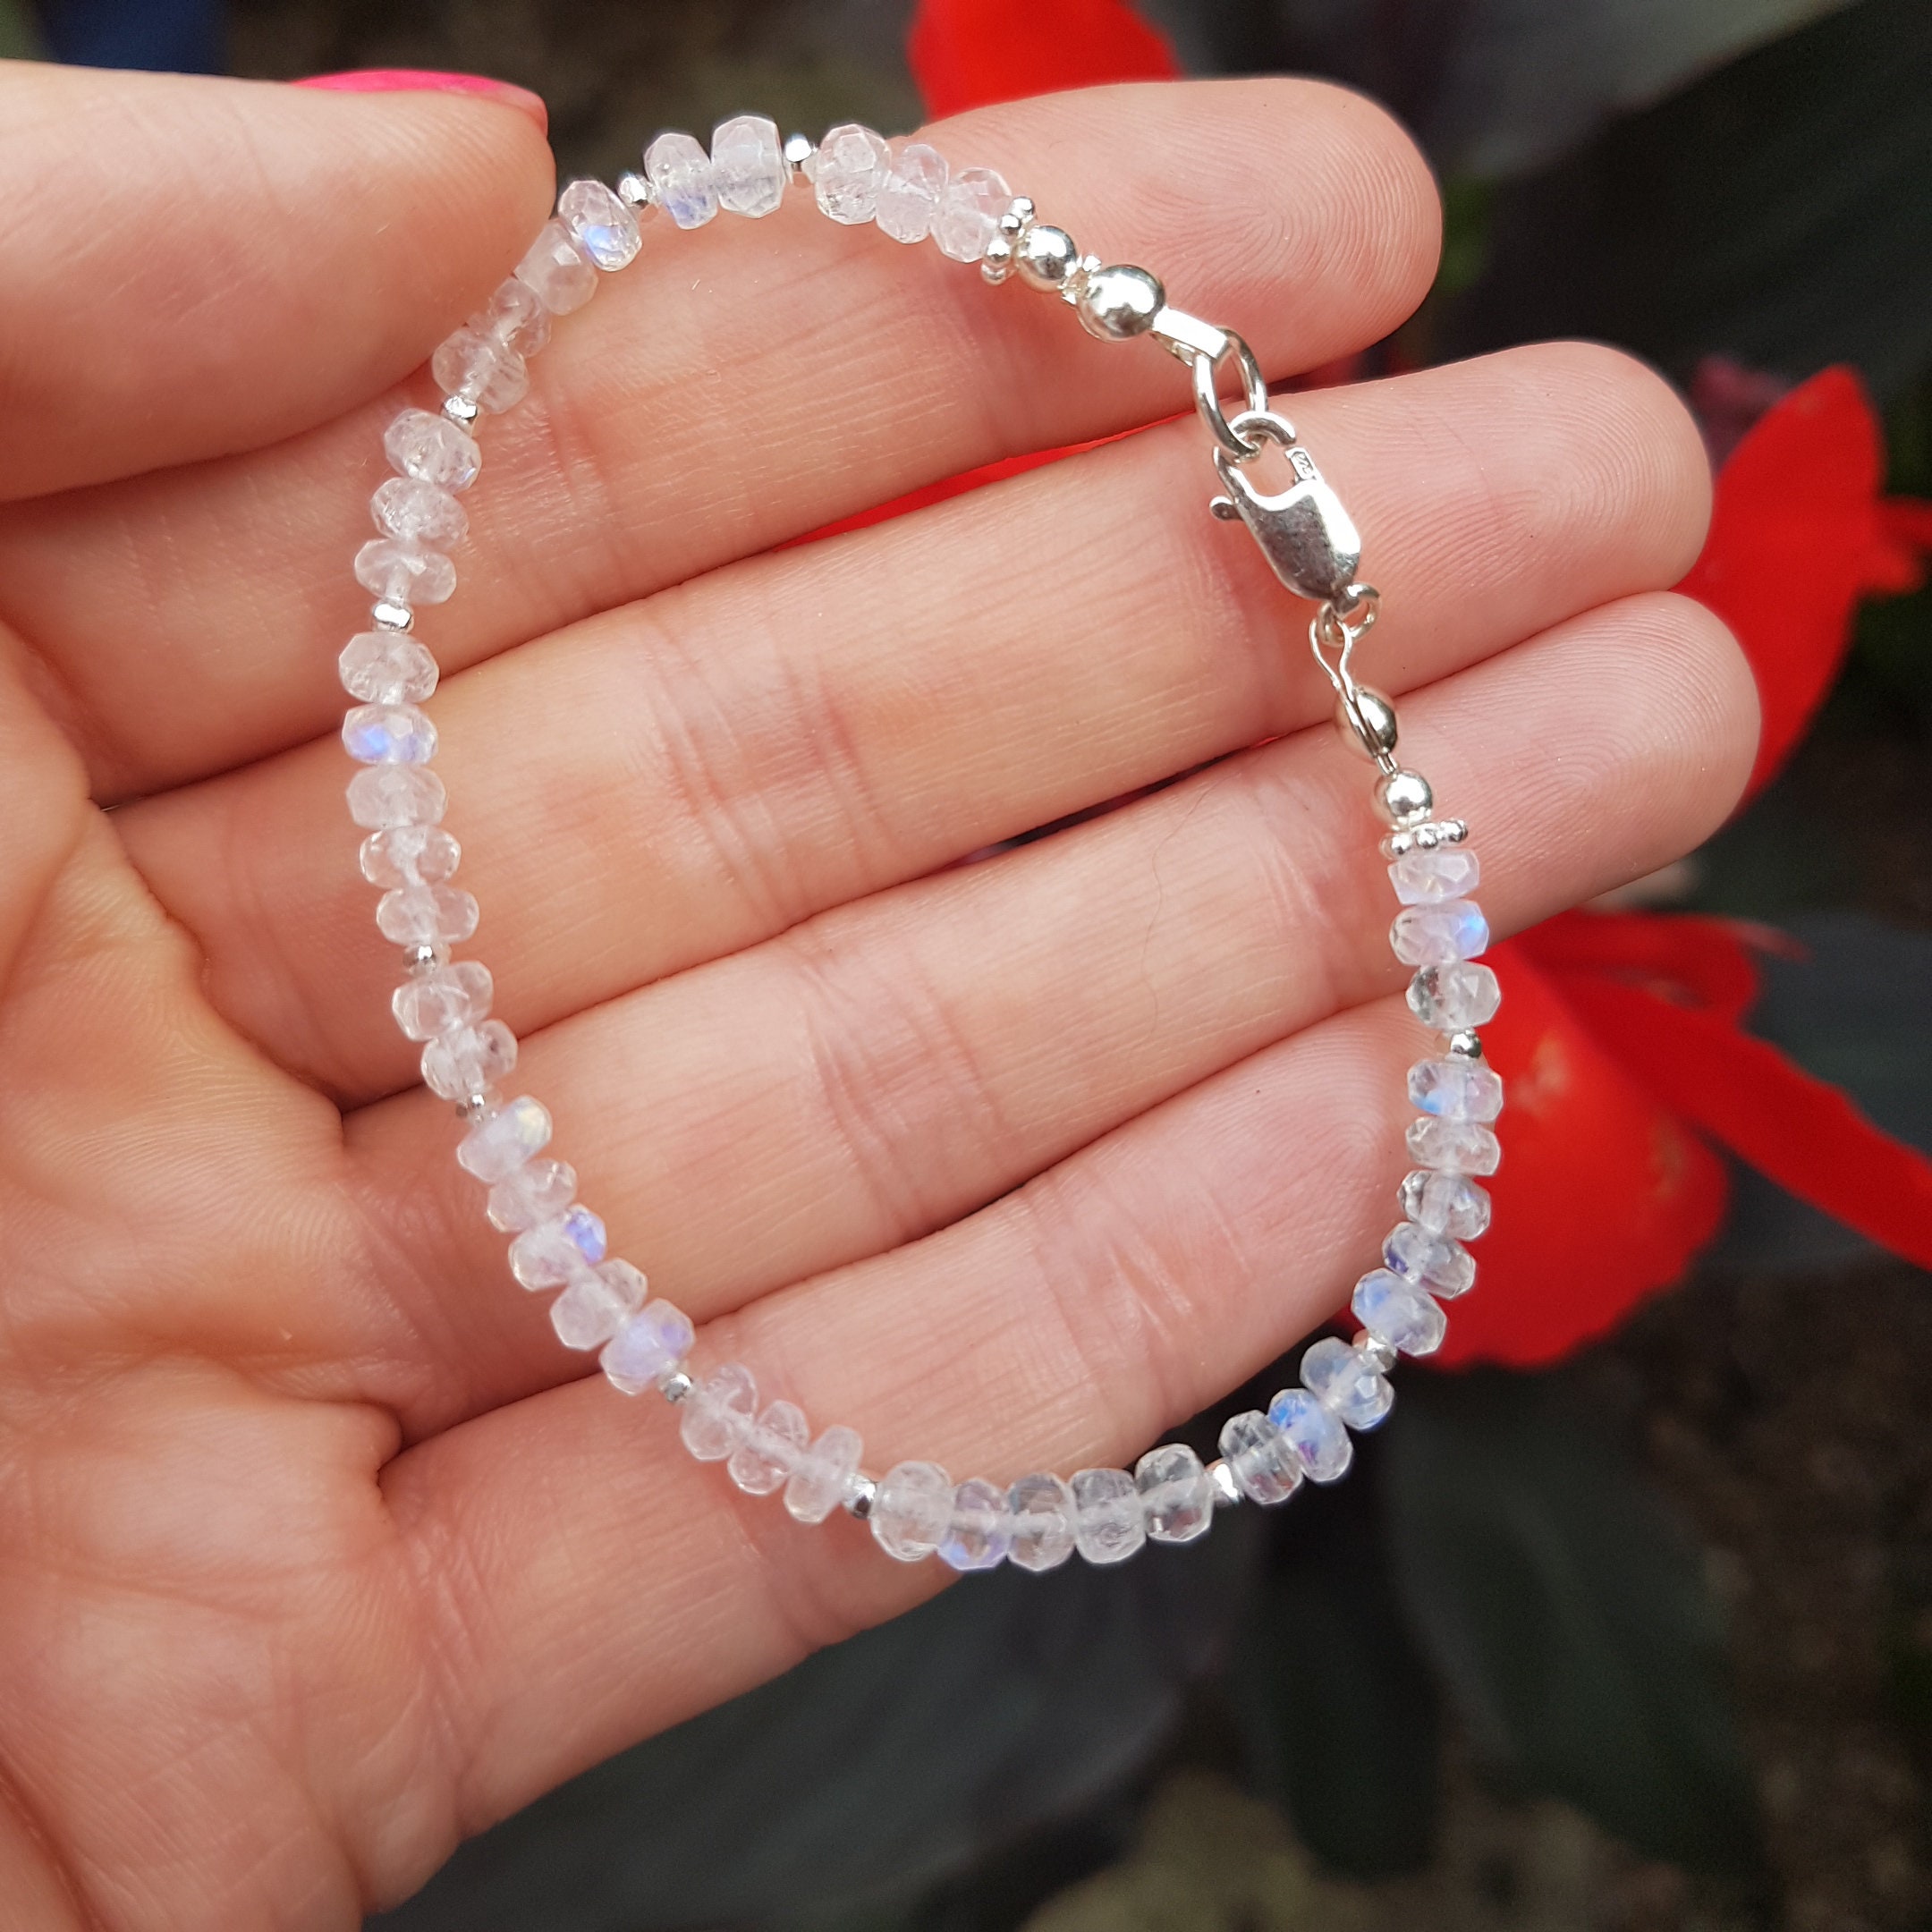 Moonstone Bracelet Genuine Moonstone Jewelry 5 mm 7 inch Long by Gemswholesale Natural White Crystal Stones Sterling Silver Tiny Beads